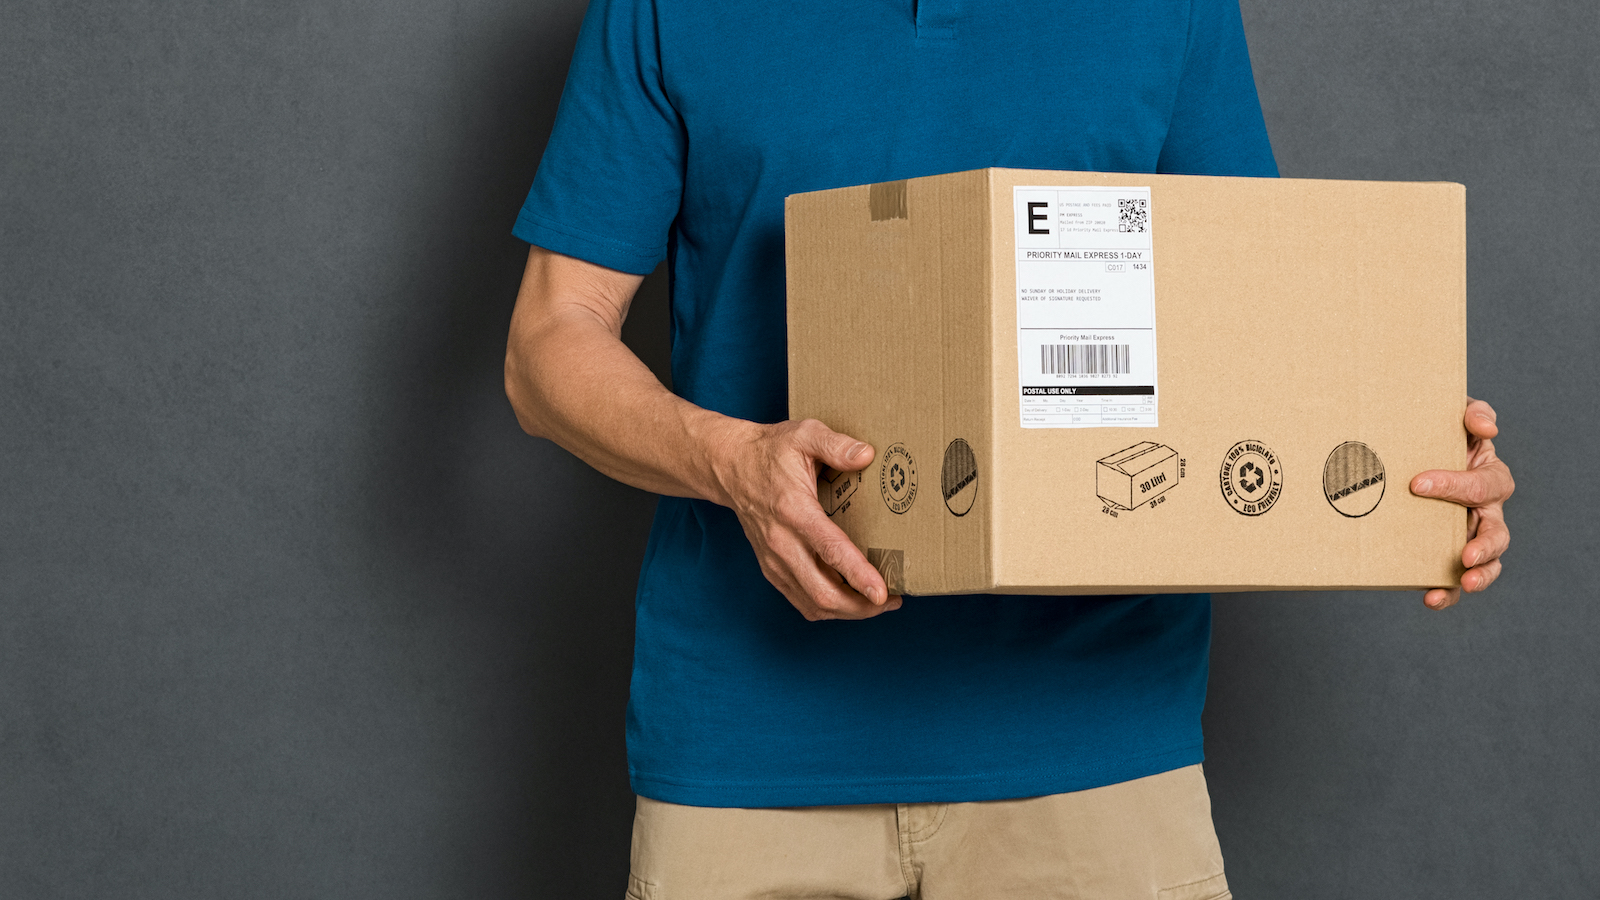 These 15 Sites With Fast Shipping Are Perfect for Last-Minute Shopping